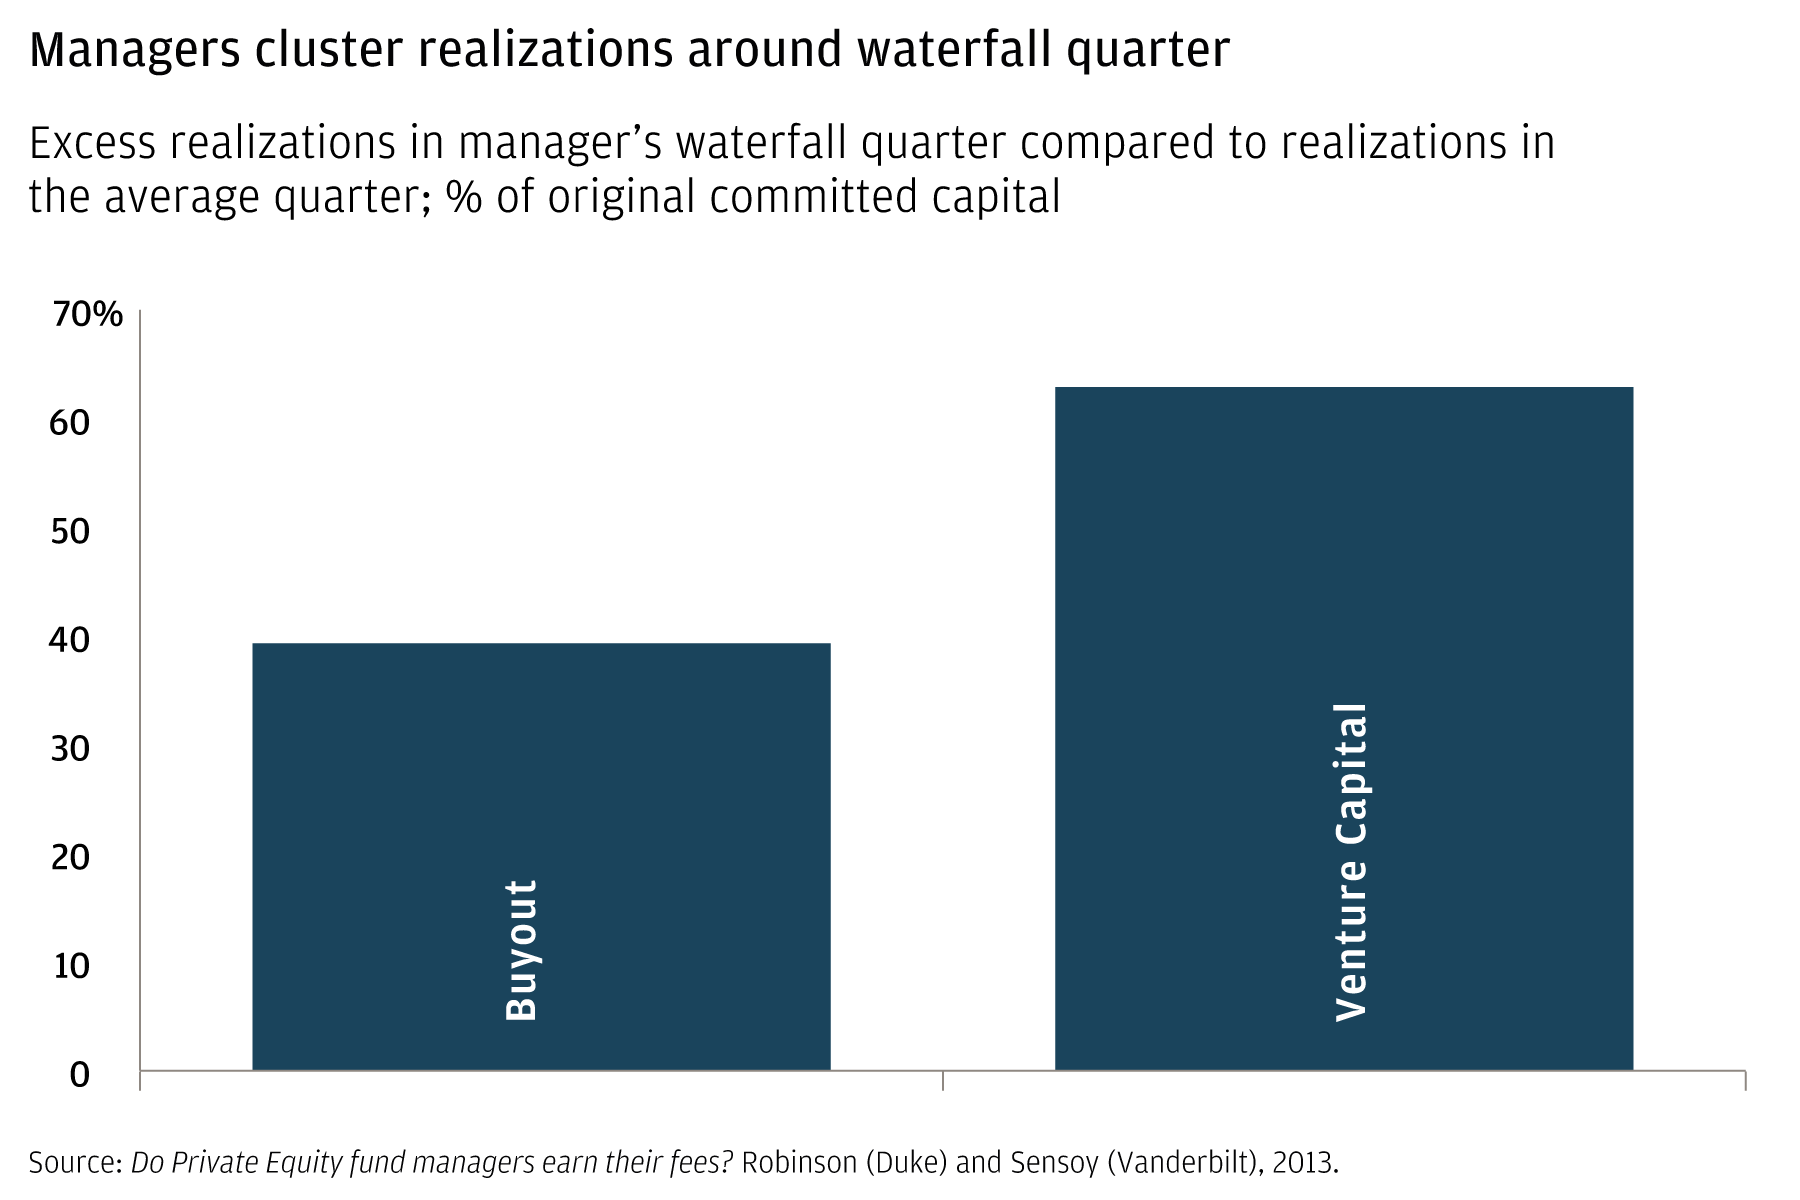 This bar chart compares buyout managers to venture capital managers on the basis of excess realizations in the manager’s waterfall quarter